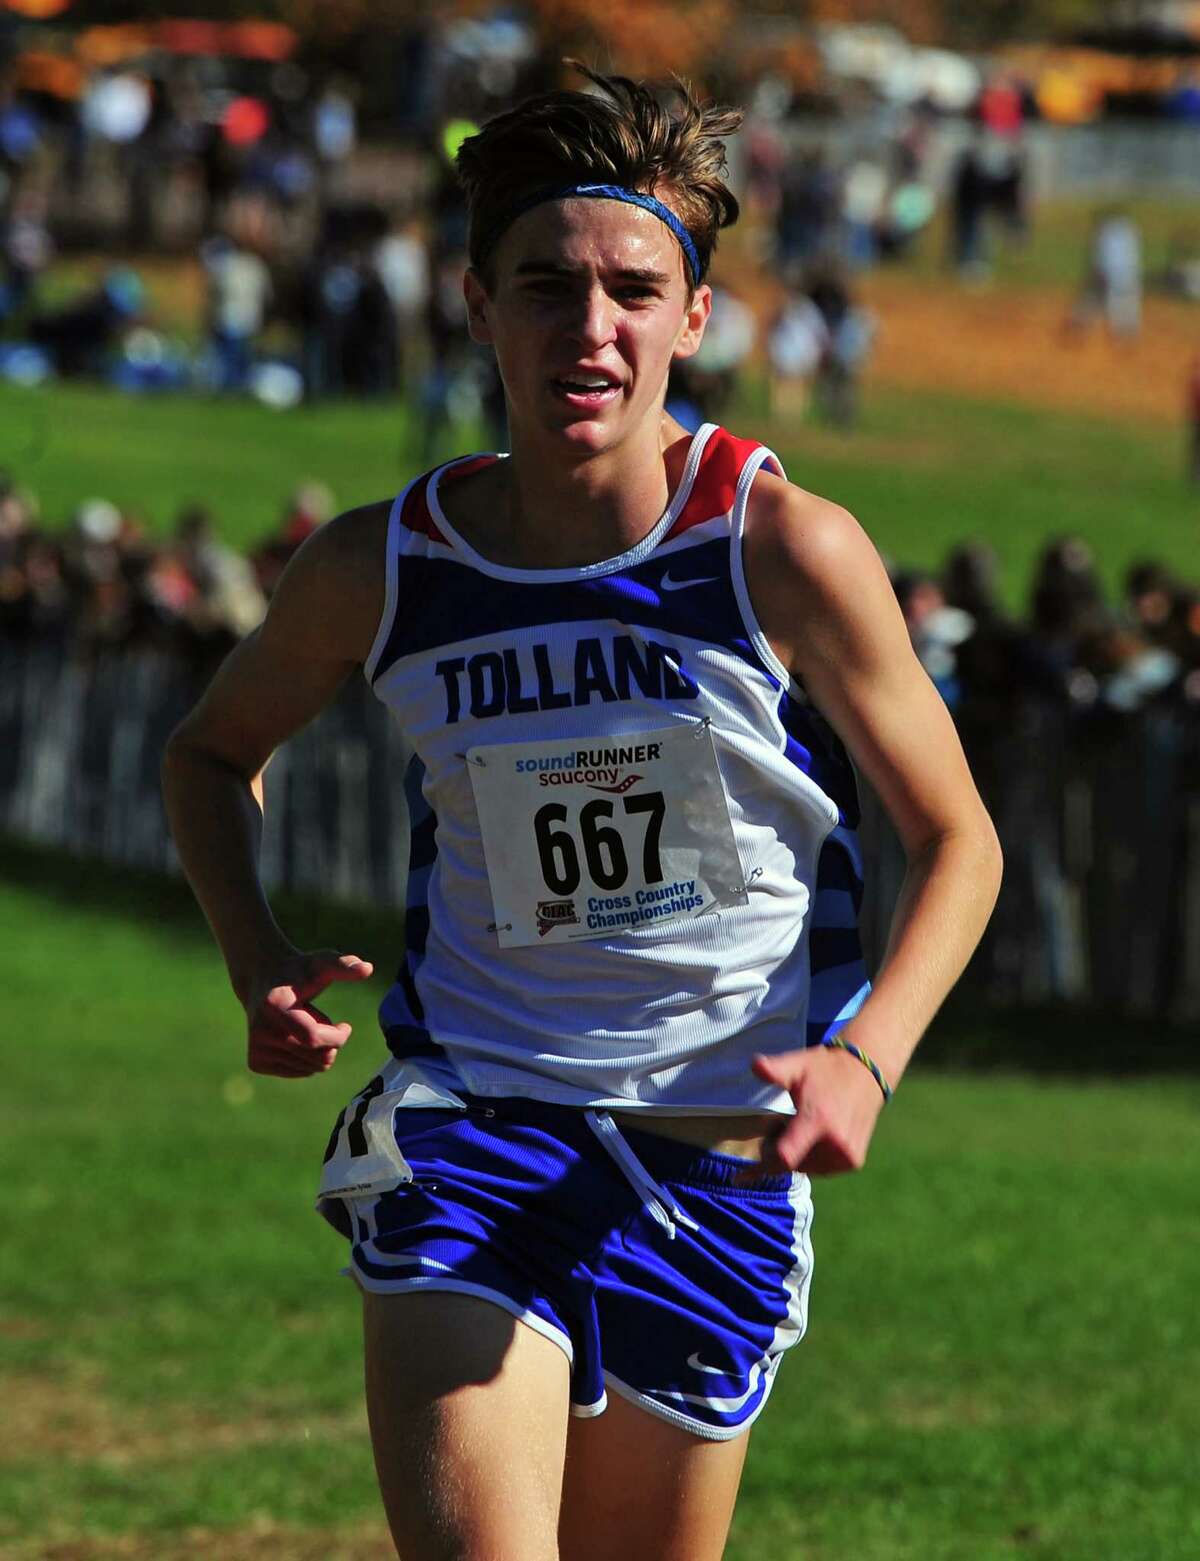 Tolland's Alec Sauter crosses the finish line during Class M cross country championship action in Manchester, Conn., on Saturday Oct. 26, 2019.